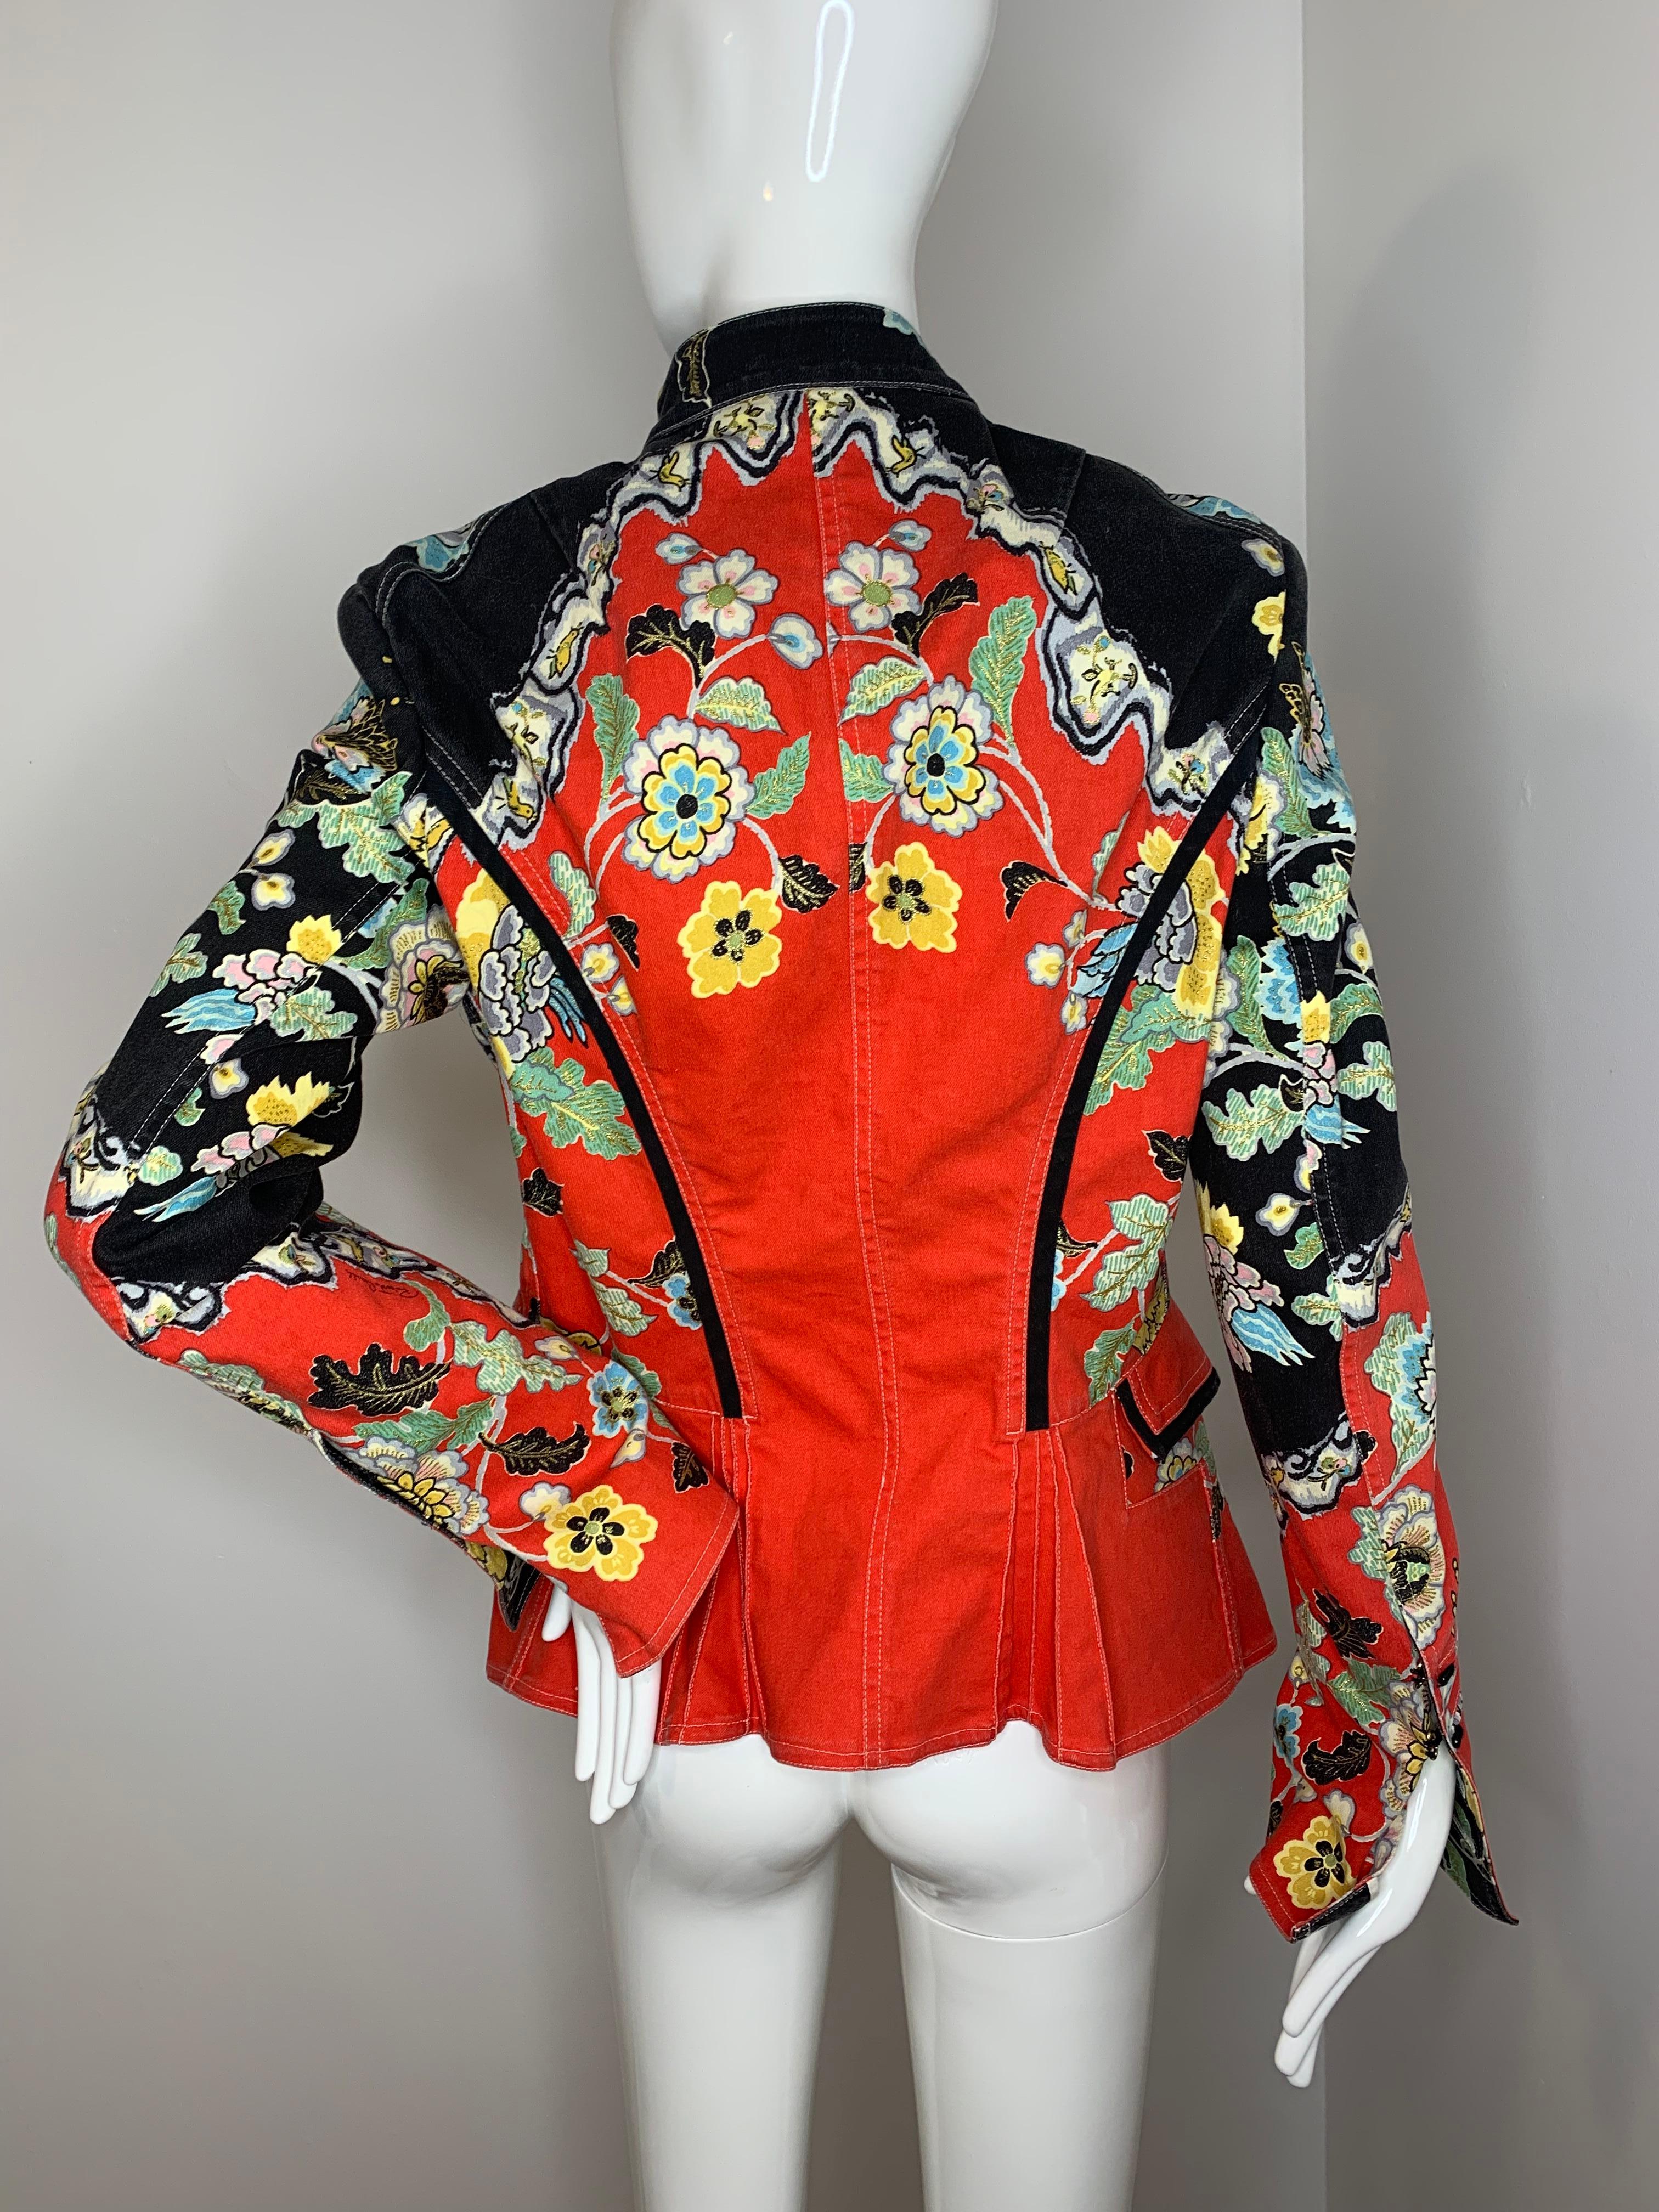 Authentic Roberto Cavalli 2003 Chinoiserie print jacket 

Size M 
Great vintage condition